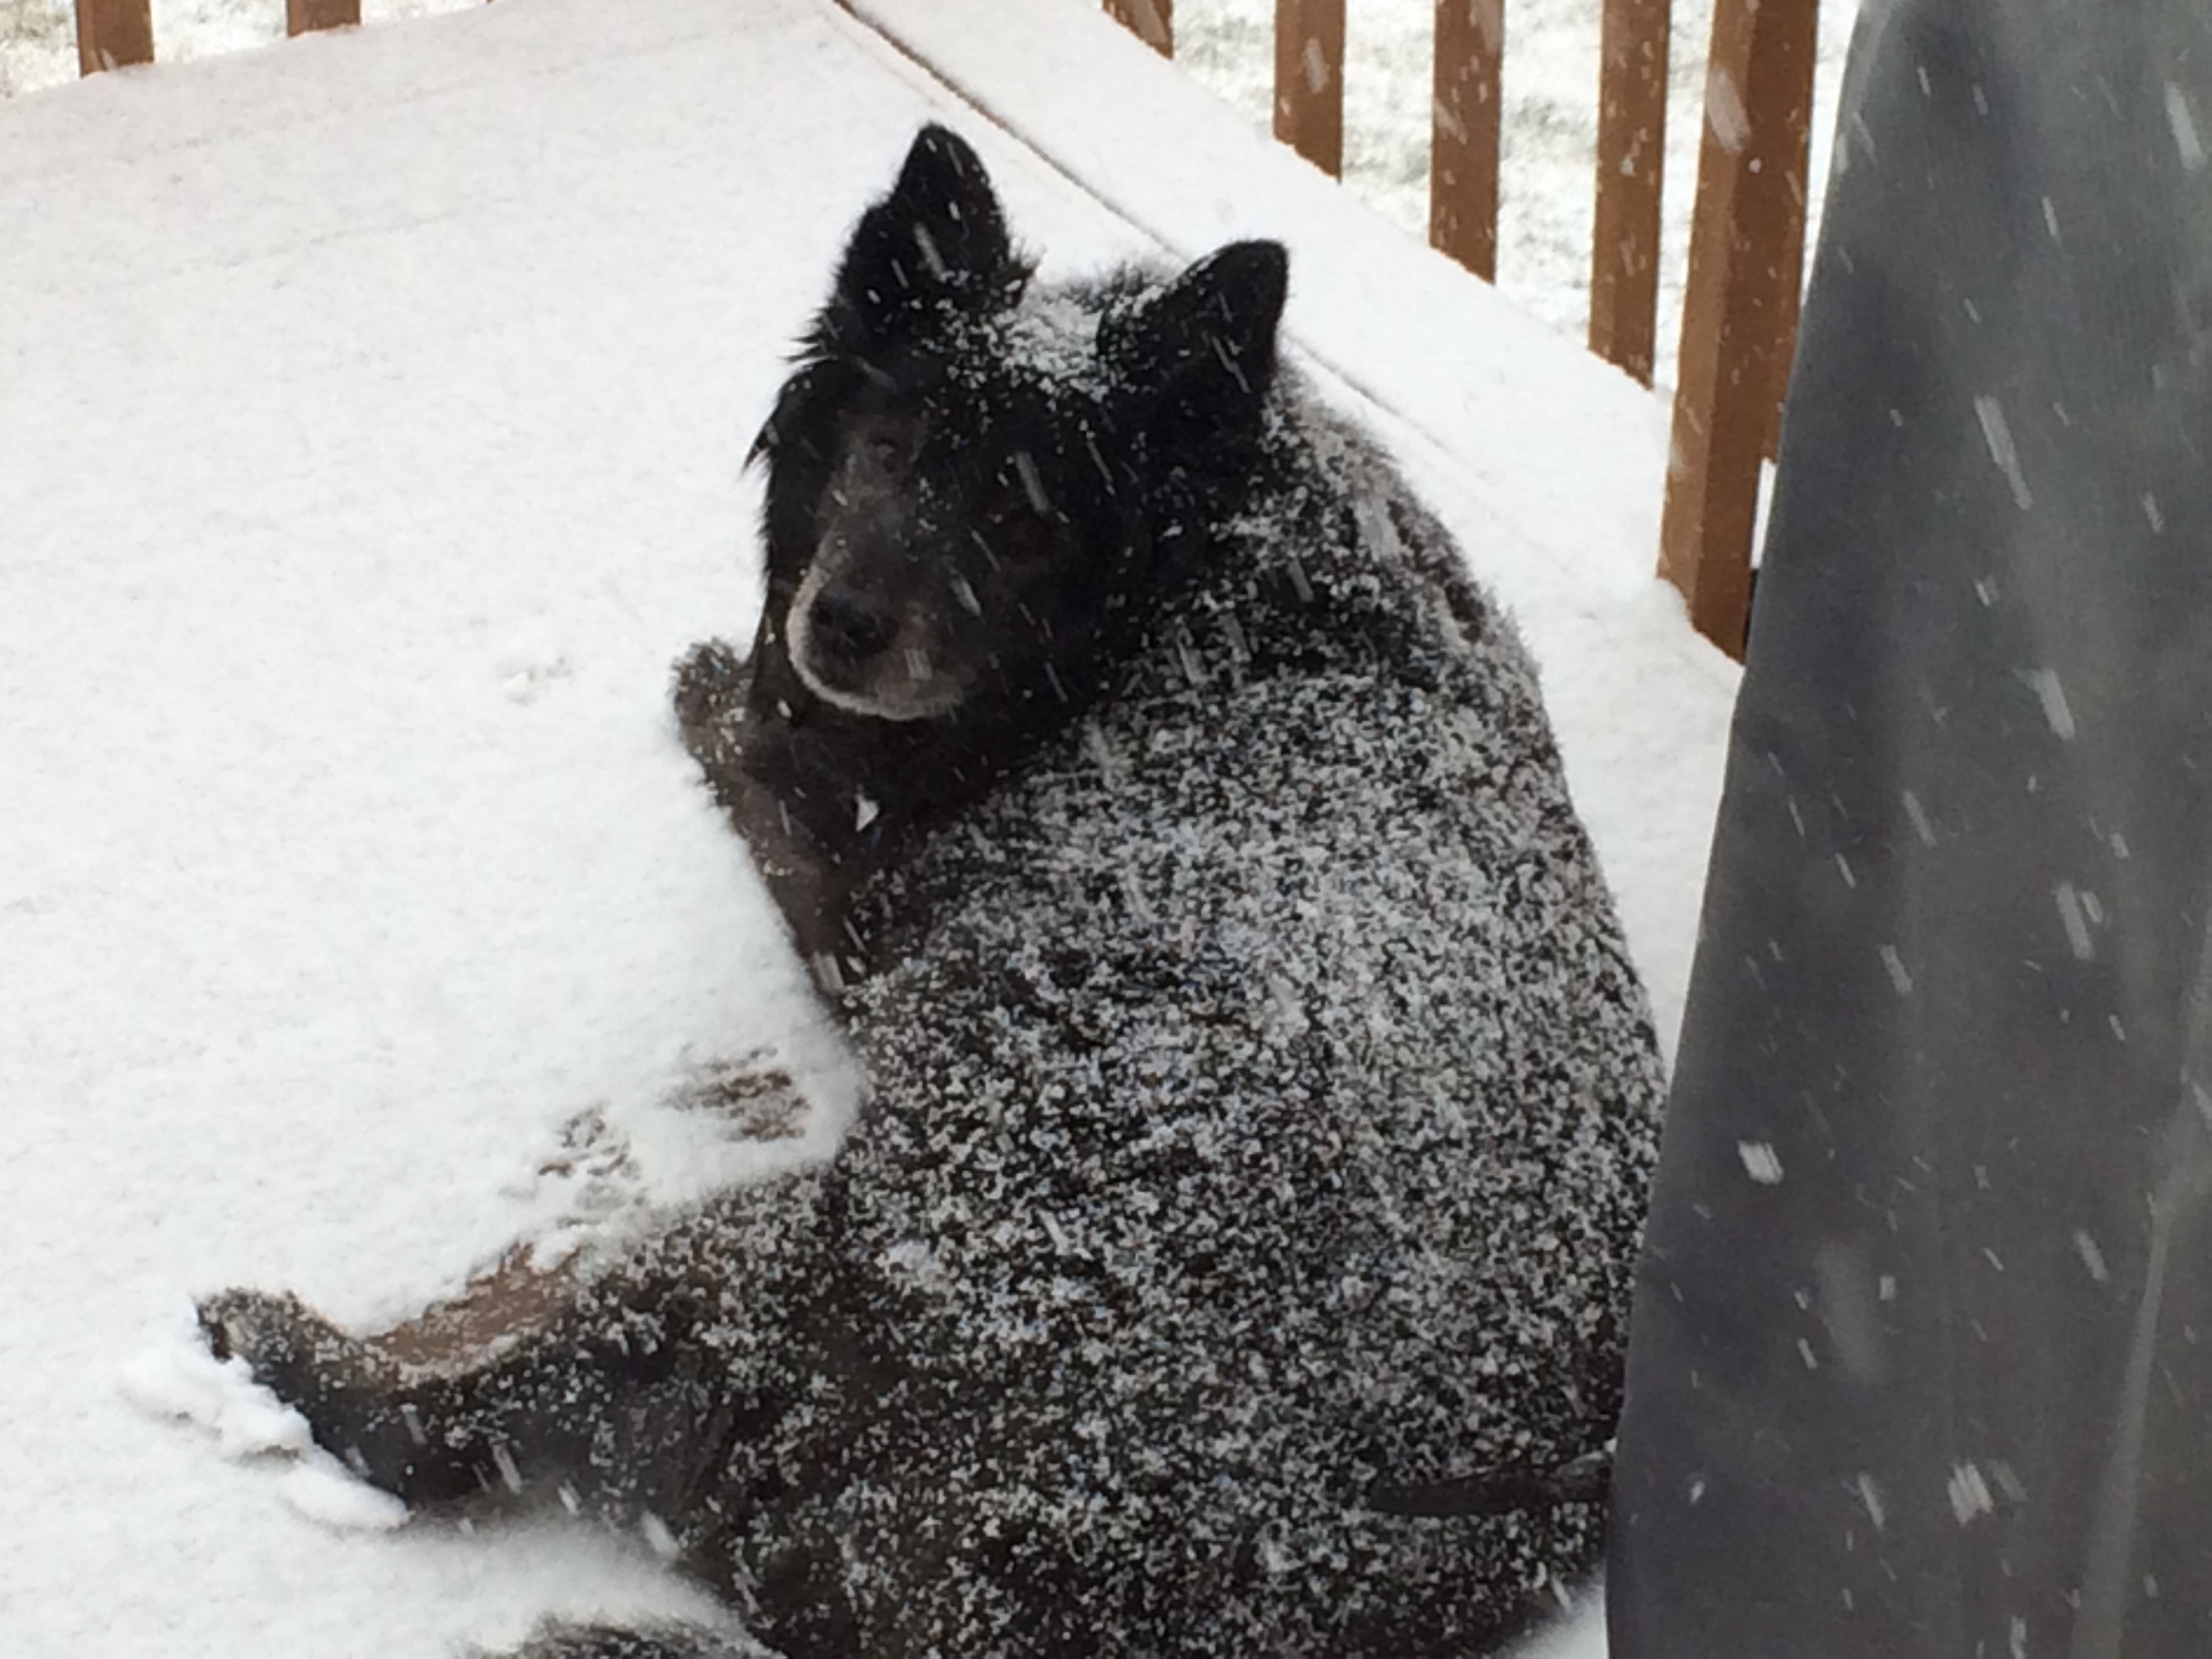 Howie lying in the snow, one of his favorite places to be. This was taken on April 13th. The last picture I took of him.